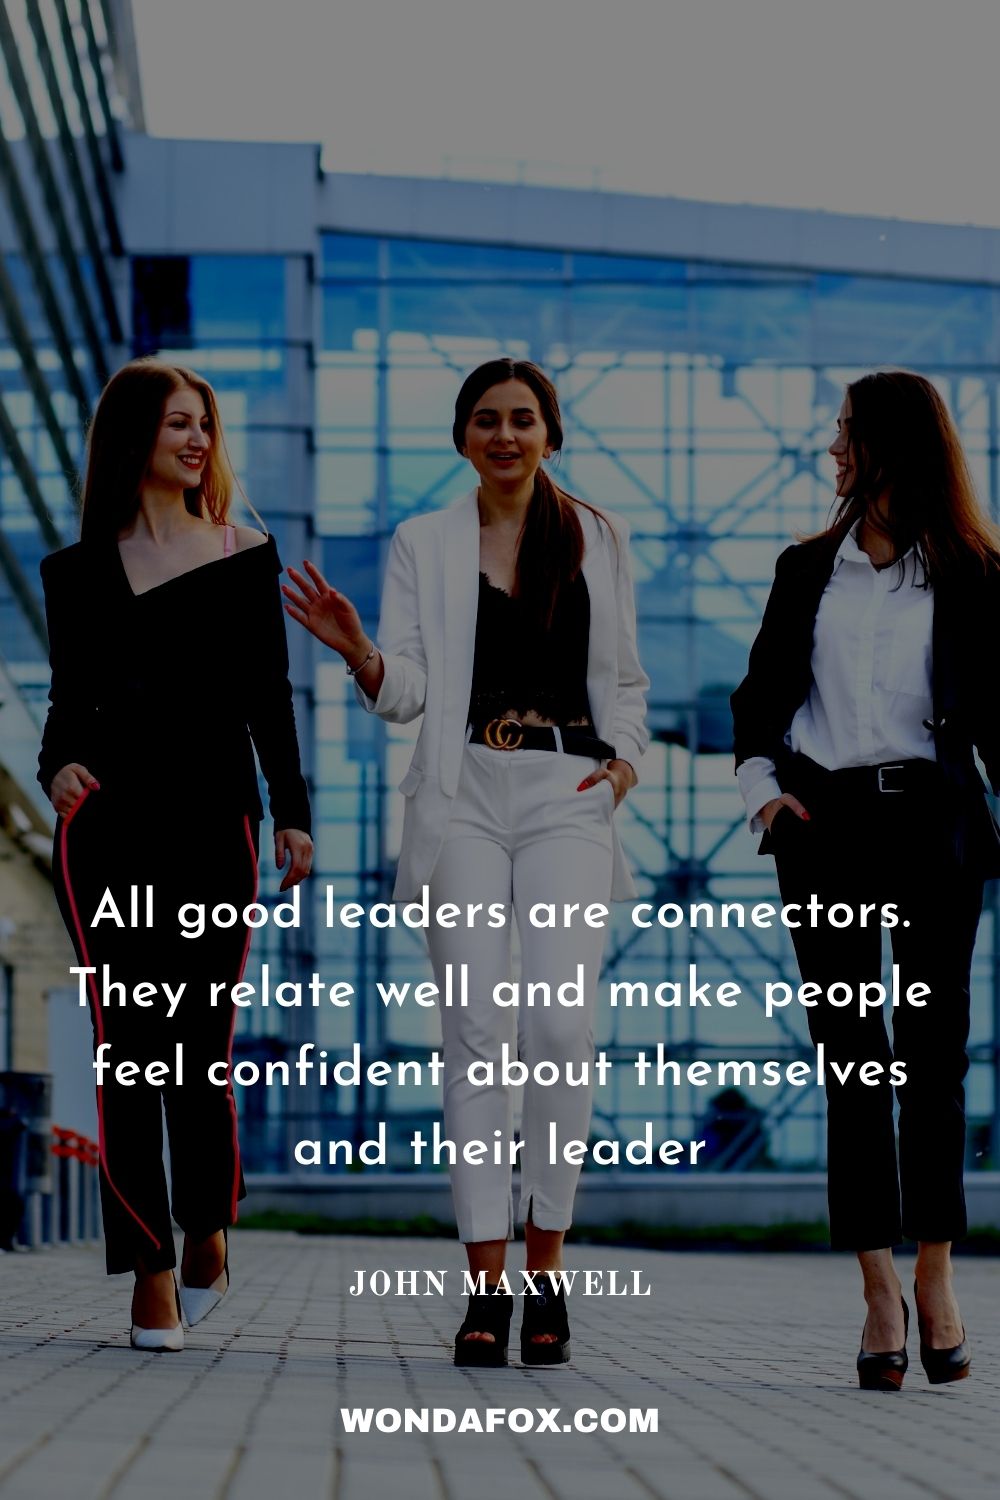 All good leaders are connectors. They relate well and make people feel confident about themselves and their leader